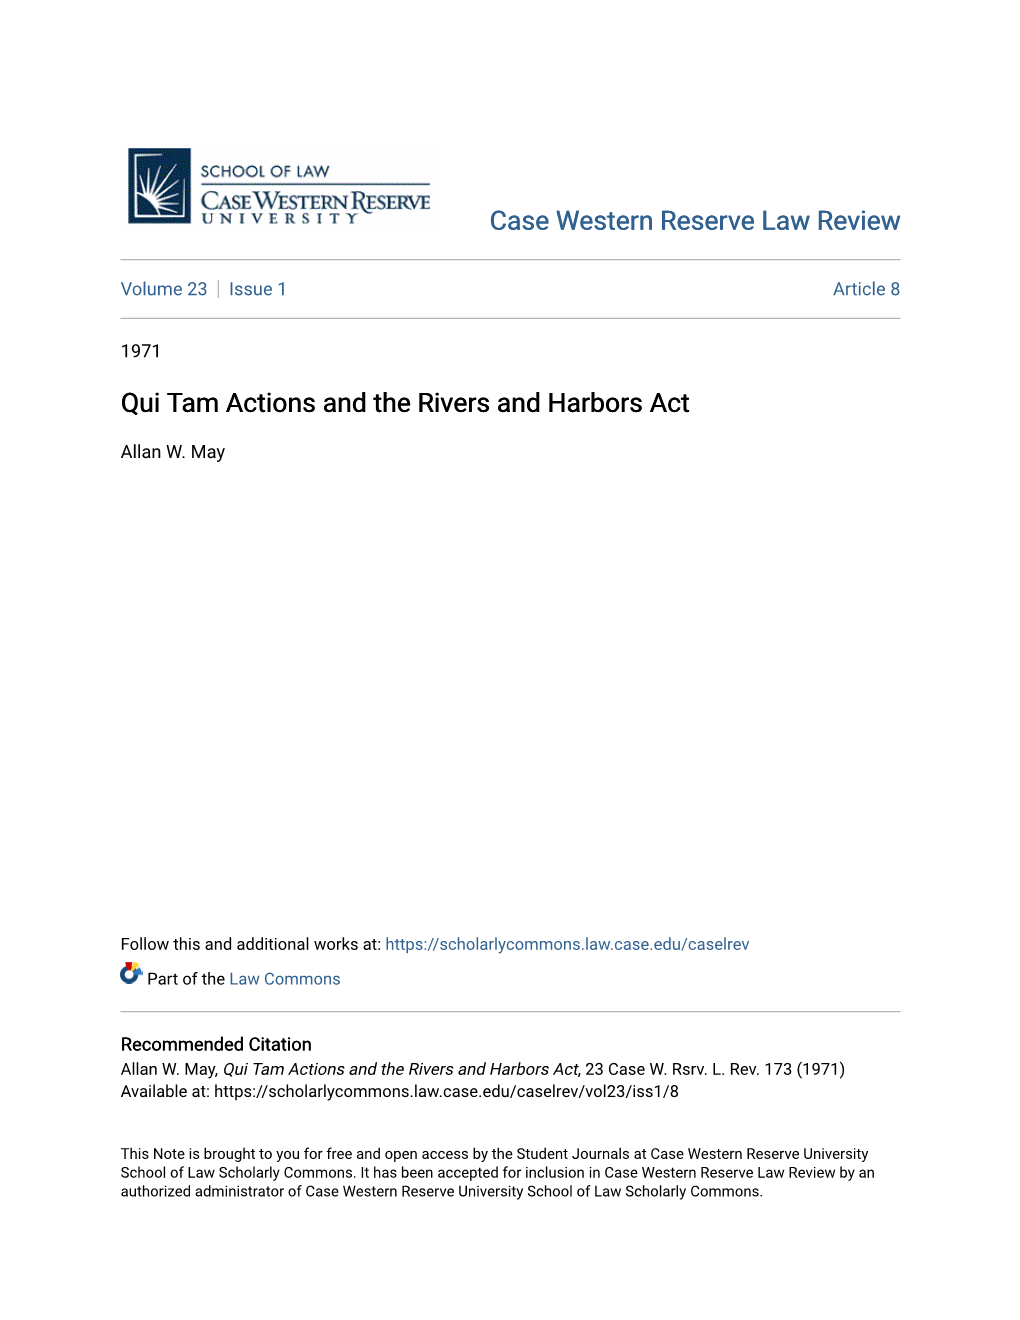 Qui Tam Actions and the Rivers and Harbors Act